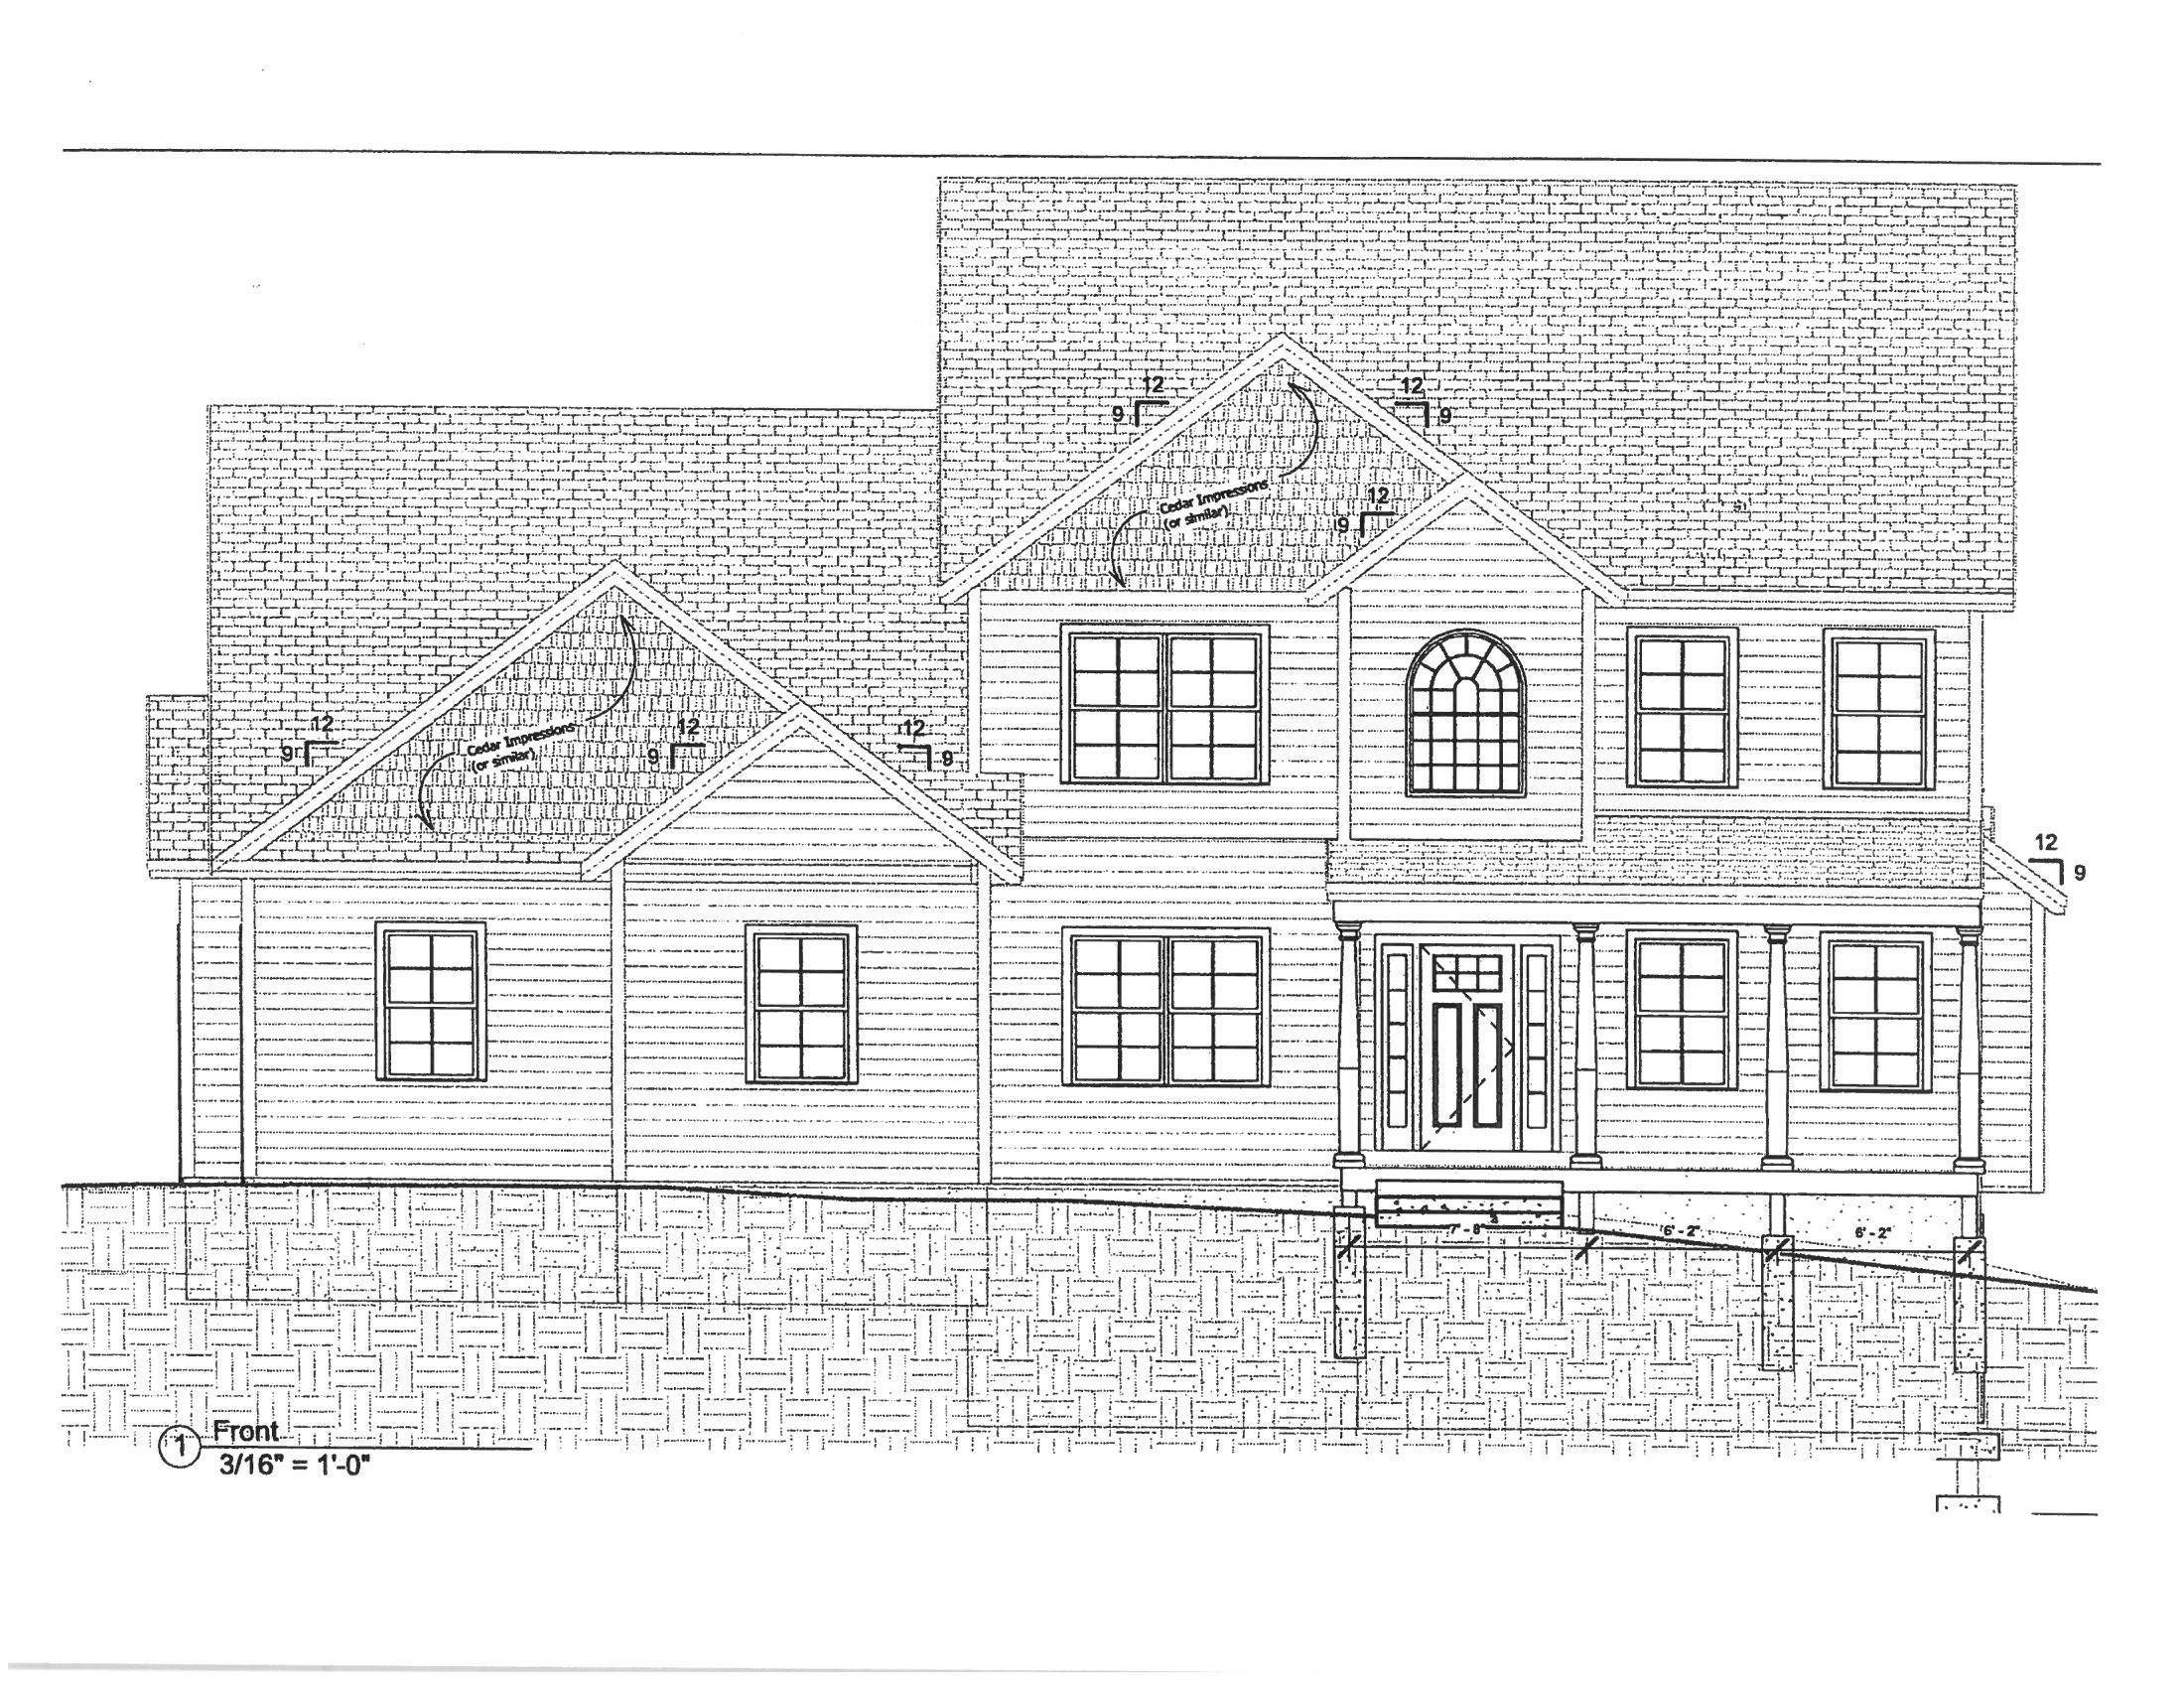 NEW CONSTRUCTION!  NORTH NASHUA!  Almost 3,000 sq ft with open concept... kitchen with breakfast nook and walk in pantry opening to spacious family room with gas fireplace, formal living and dining room, mud room coming in from 3 car attached garage...4 spacious bedrooms, walk-in closet in primary bedroom, walk out lower level...3/4 acre